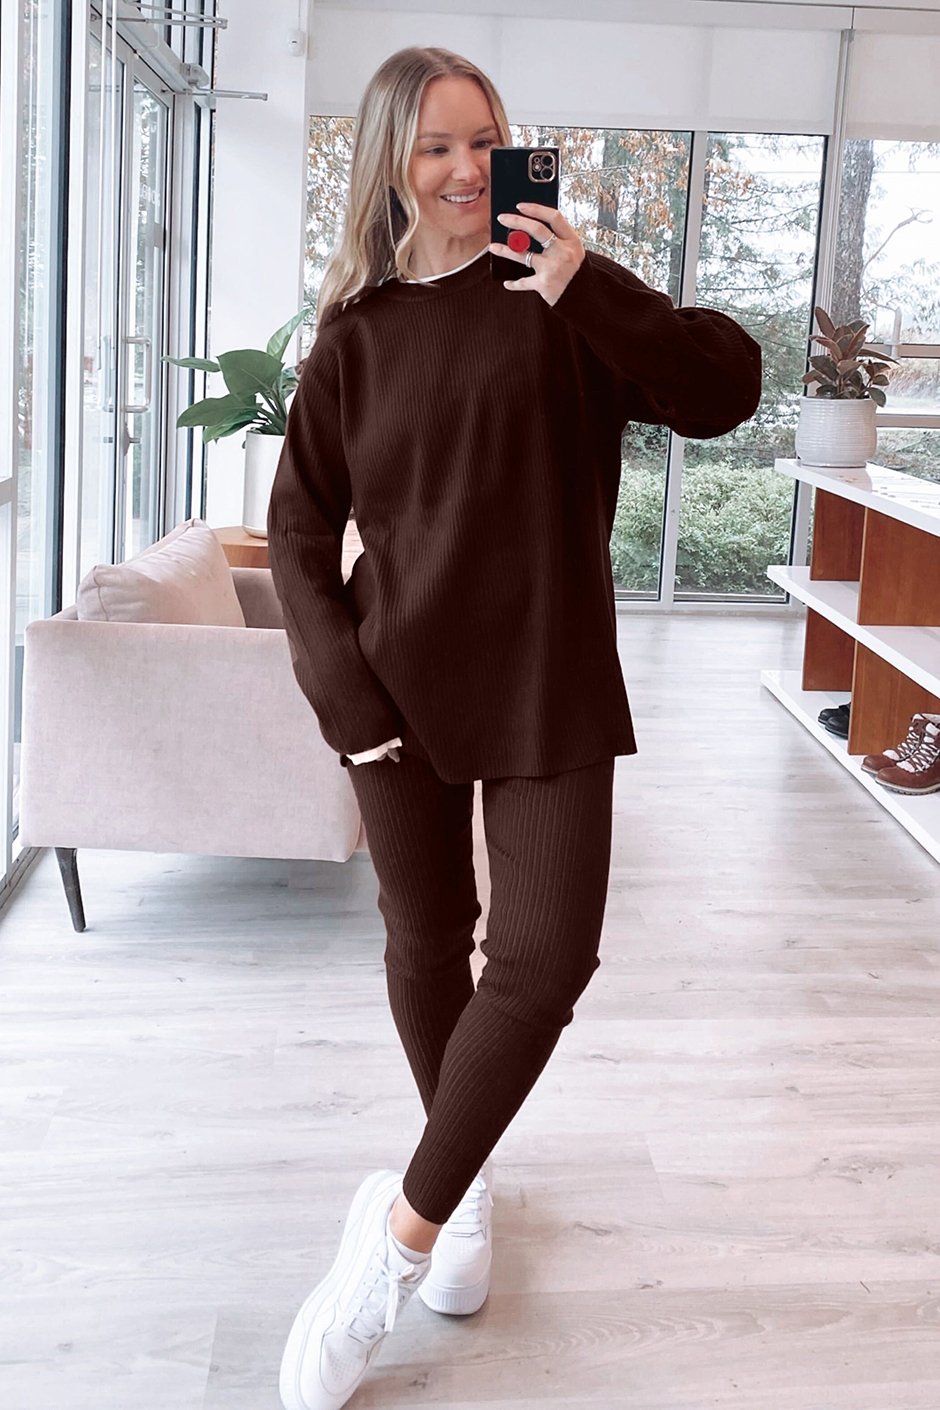 https://c211747605cdf5d8cd74-f50fbe37b046904c7c00bee626e99452.ssl.cf2.rackcdn.com/images/products/the_chic_ribbed_legging_frenchpress_1_1705609592_lg.jpg